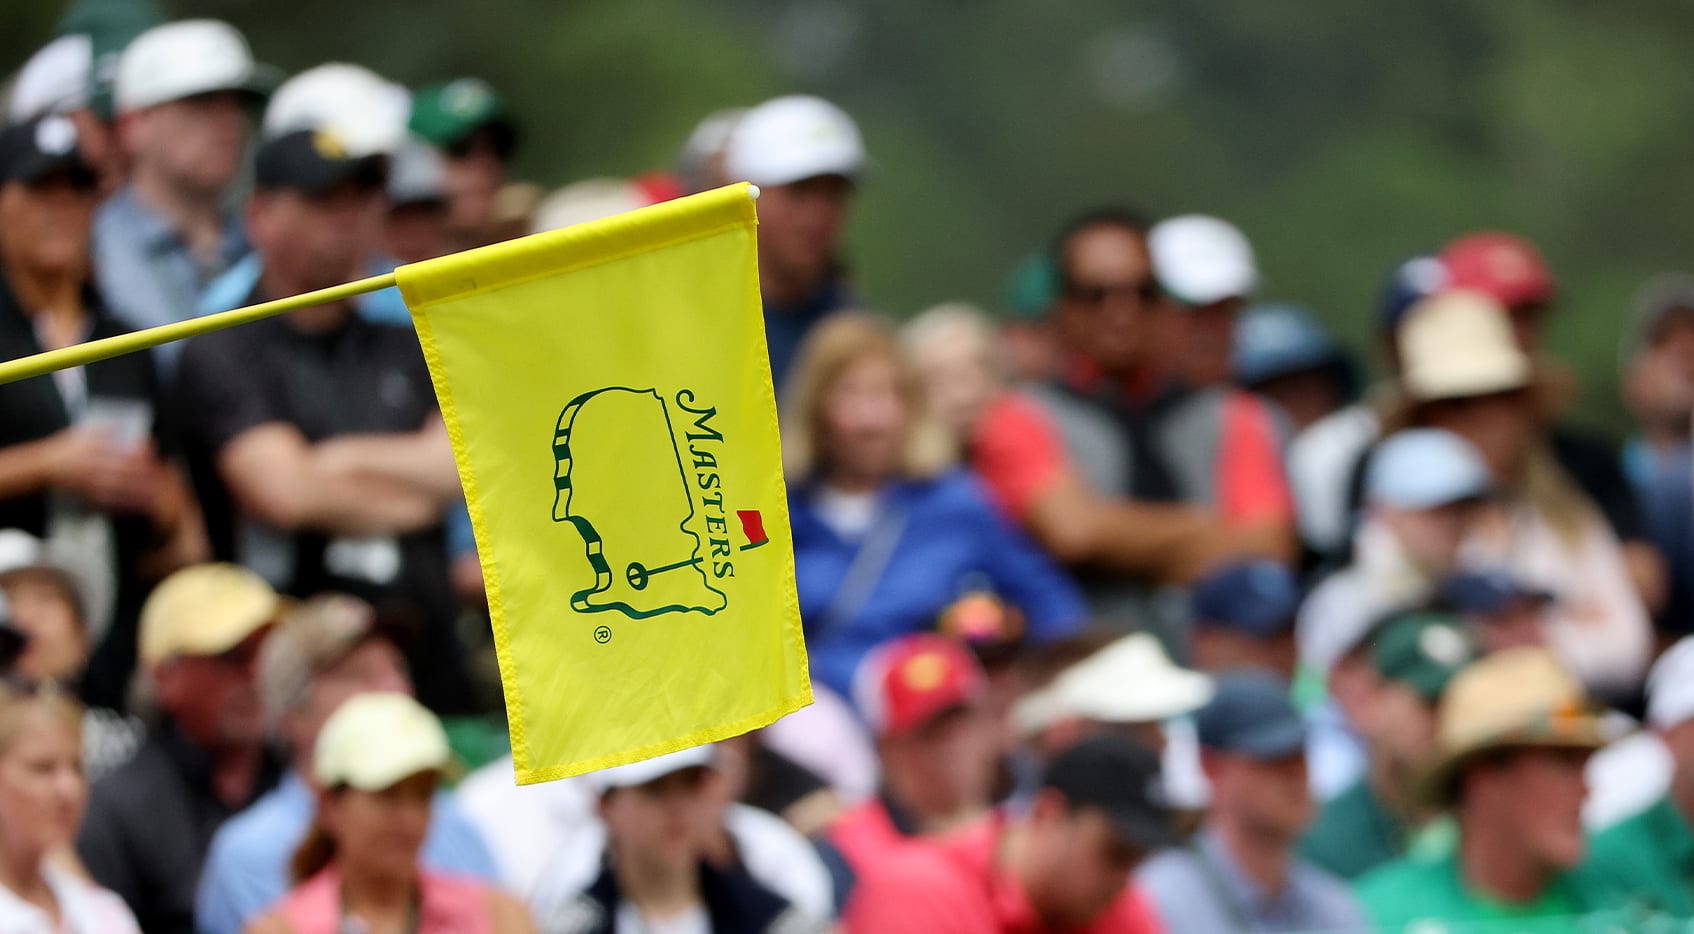 Masters 2023: Winner's Payout & Prize Money Earnings